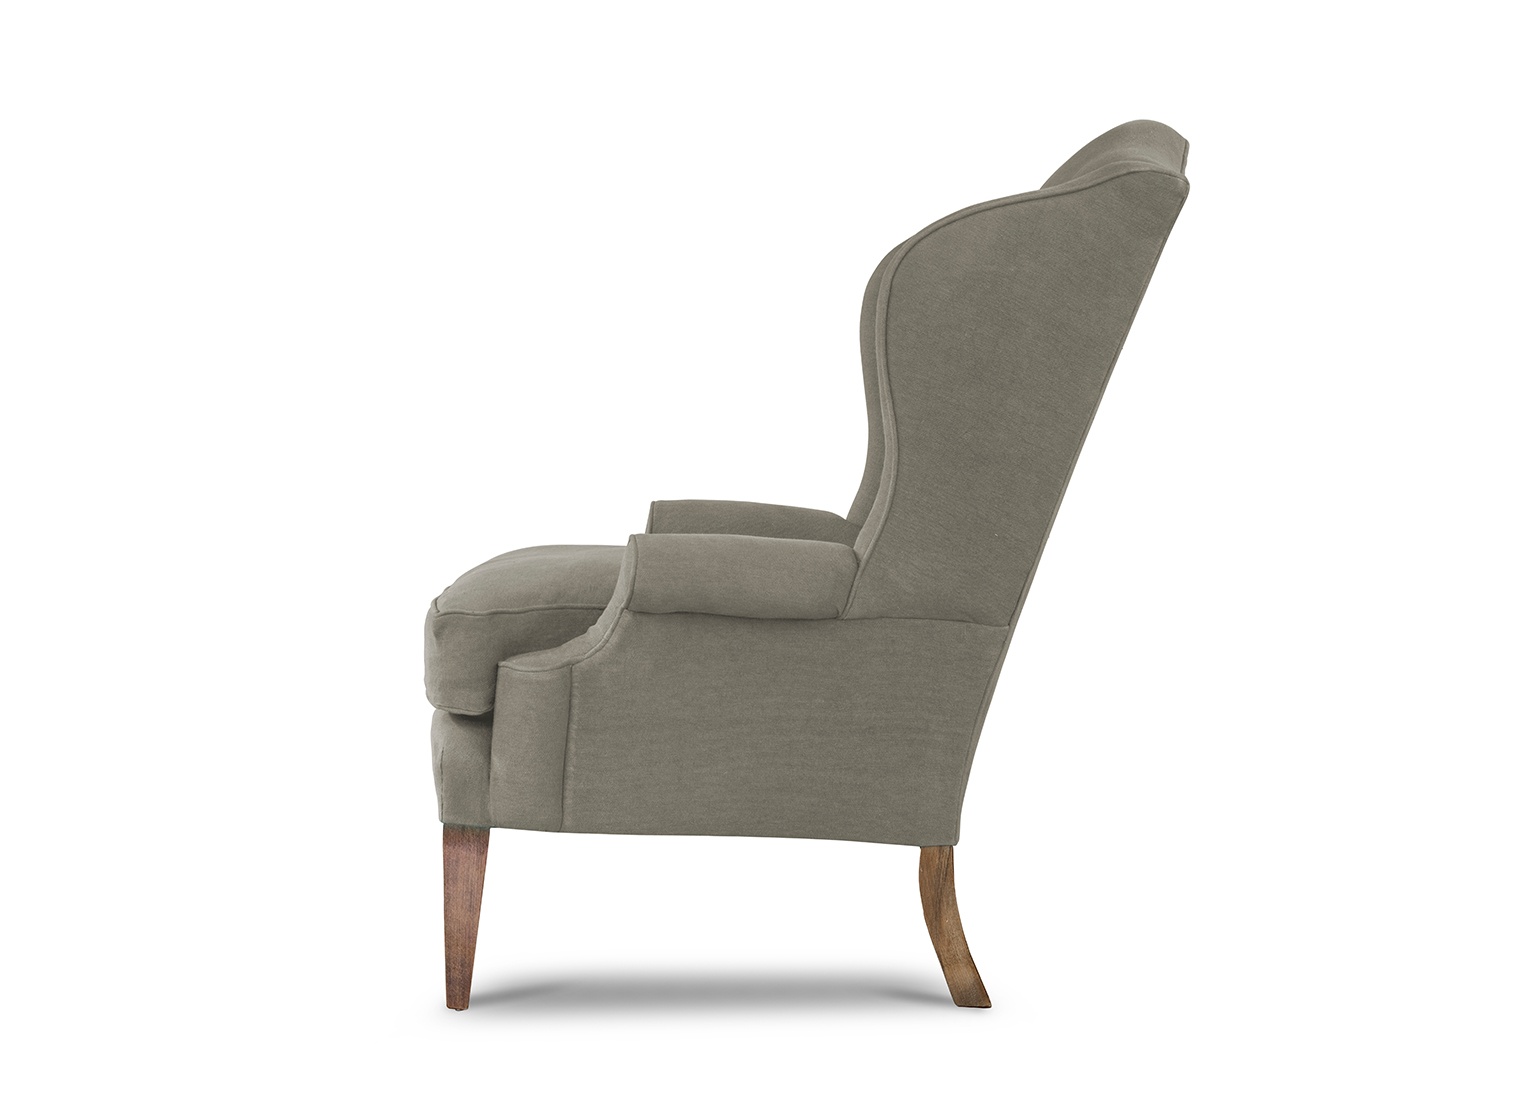 Club Wing Chair in Orkney - Asphalt - Beaumont & Fletcher